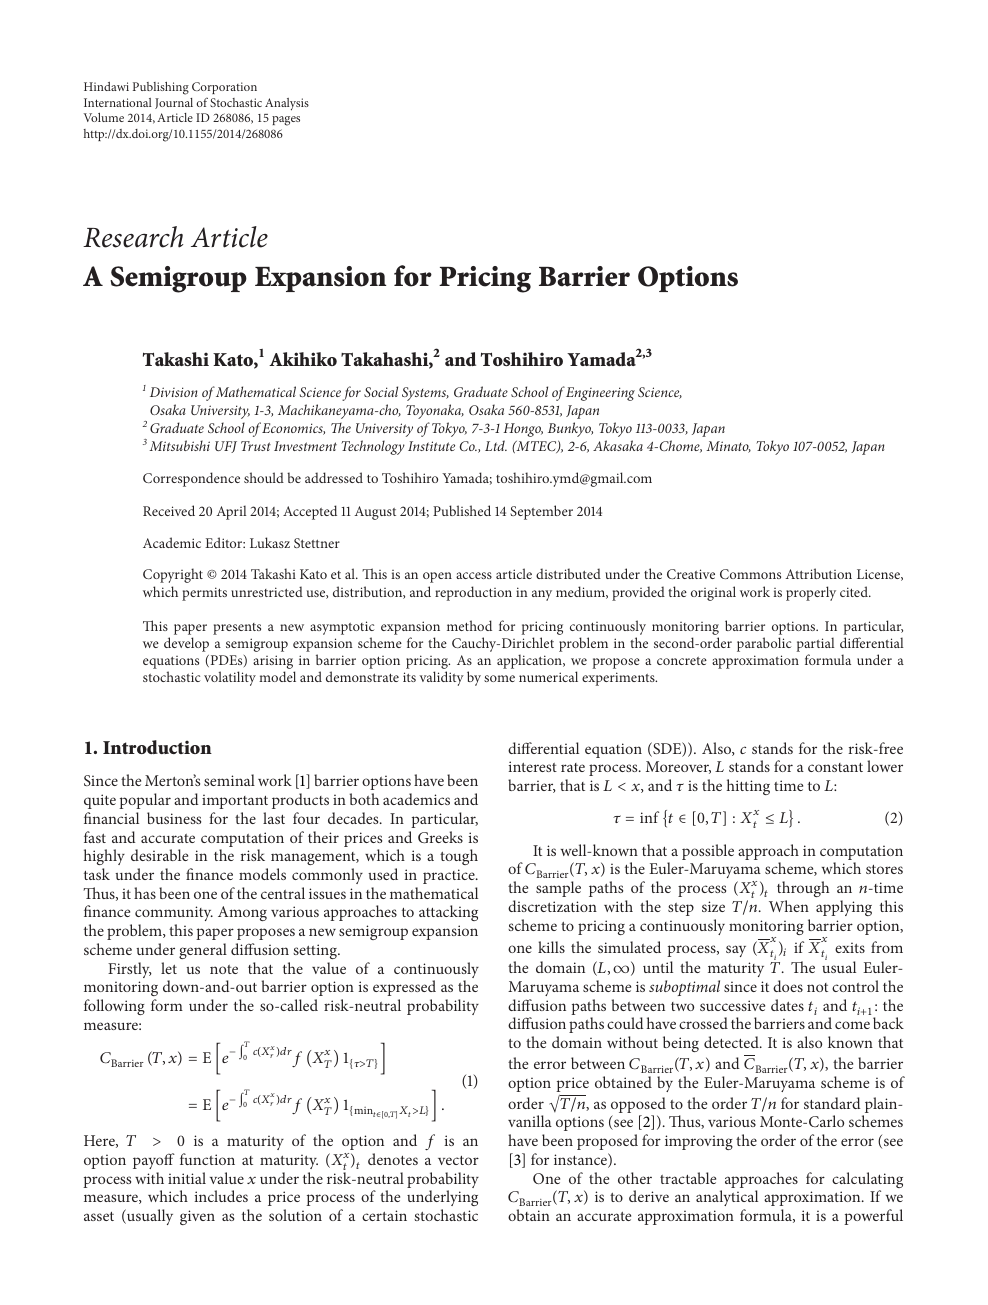 A Semigroup Expansion For Pricing Barrier Options Topic Of Research Paper In Mathematics Download Scholarly Article Pdf And Read For Free On Cyberleninka Open Science Hub